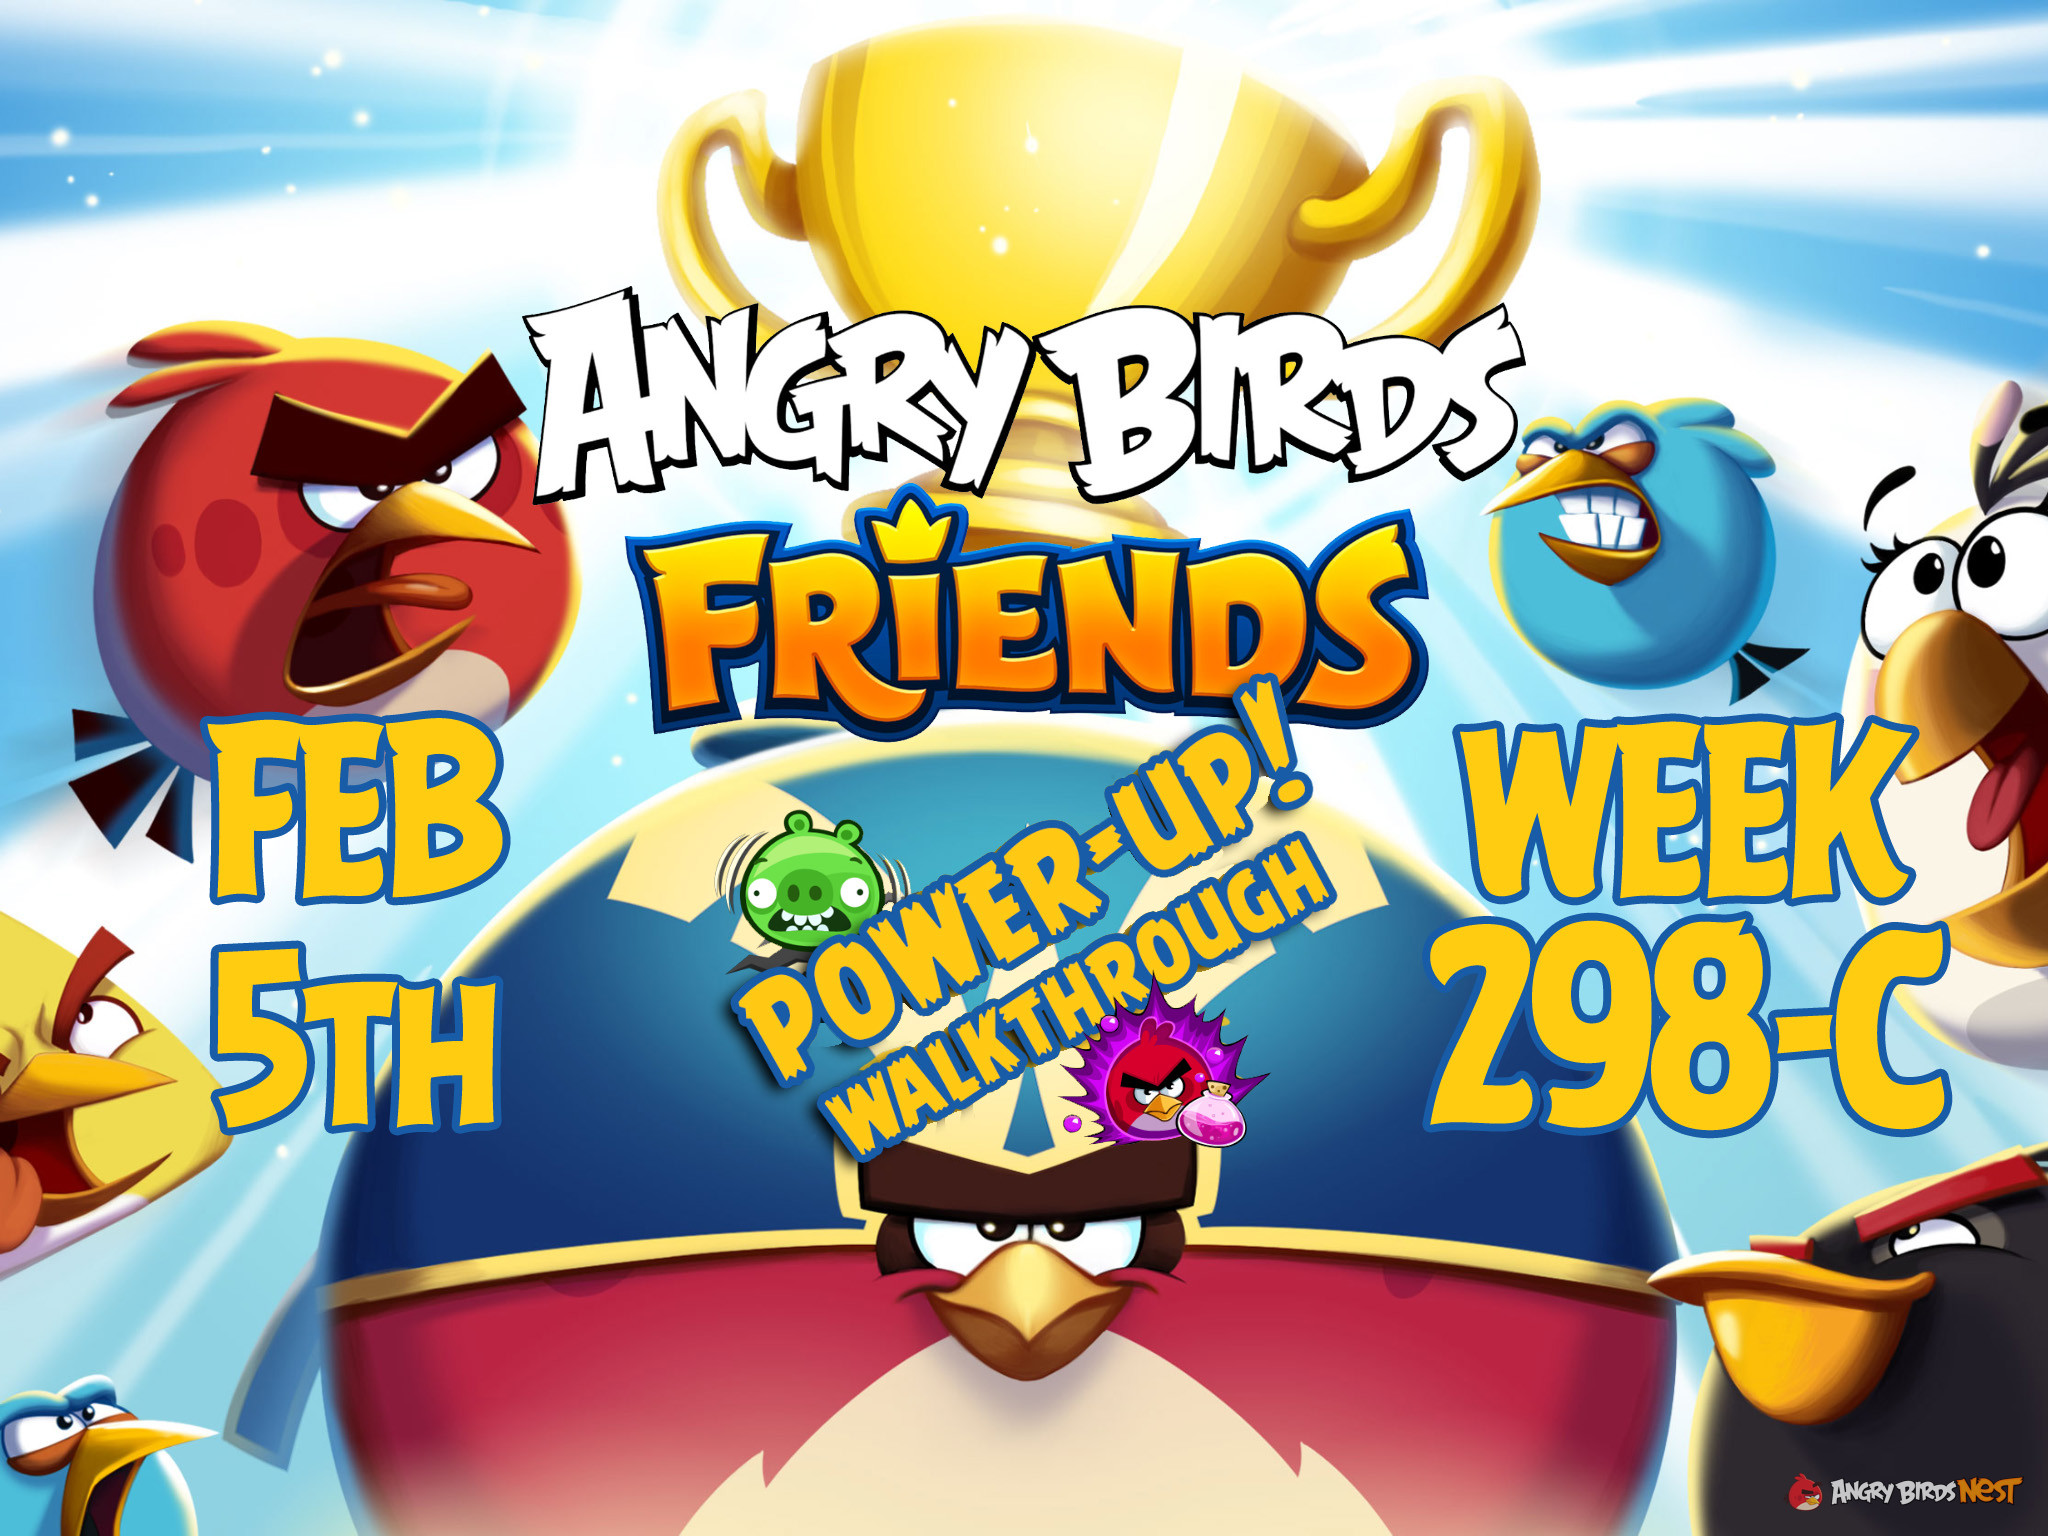 Angry Birds Friends Tournament Week 298-C Feature Image PU